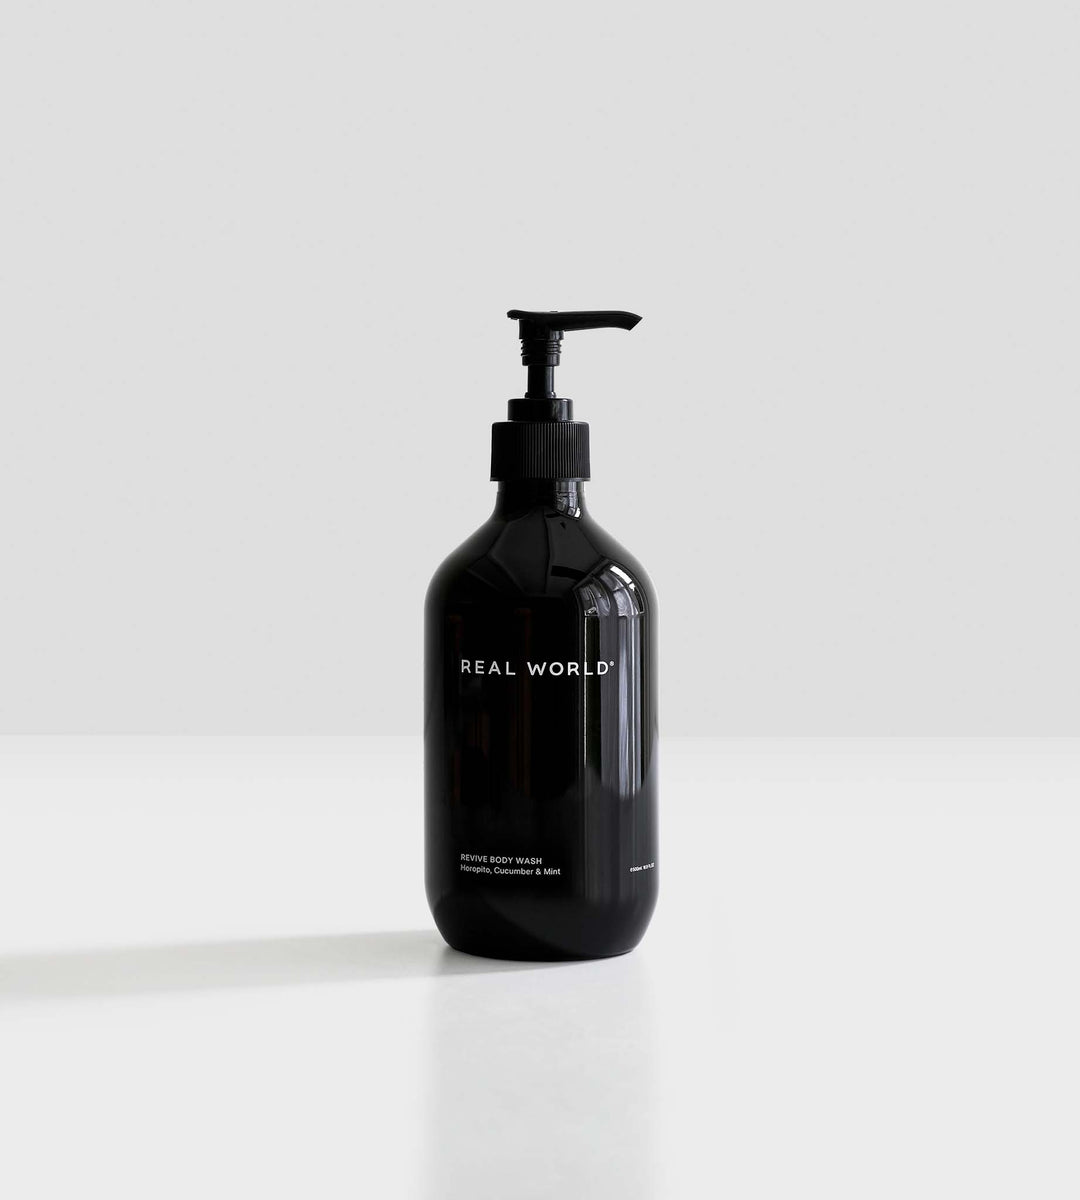 Real World | Revive Body Wash | Horopito, Cucumber & Mint